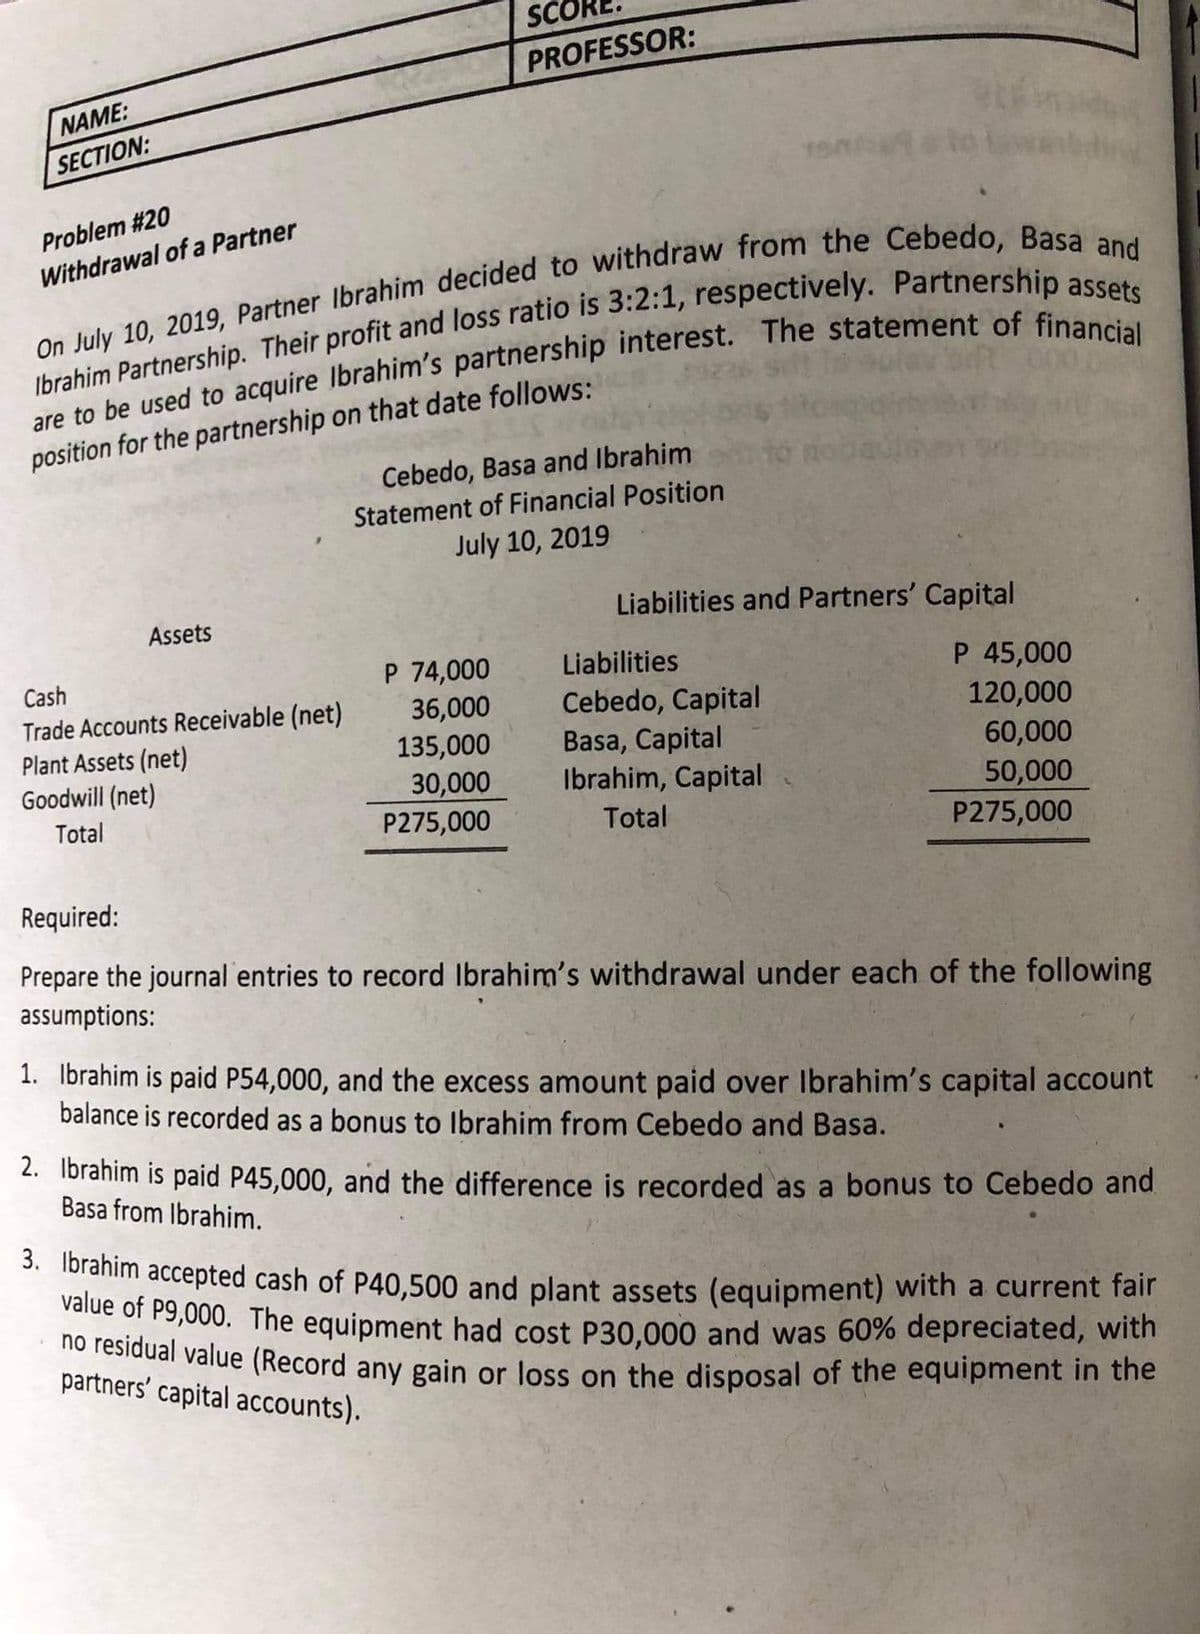 SCO
PROFESSOR:
NAME:
SECTION:
Problem #20
Withdrawal of a Partner
position for the partnership on that date follows:
Cebedo, Basa and Ibrahim
Statement of Financial Position
July 10, 2019
Liabilities and Partners' Capital
骨
Assets
P 74,000
36,000
135,000
30,000
P275,000
Liabilities
P 45,000
120,000
Cash
Trade Accounts Receivable (net)
Plant Assets (net)
Goodwill (net)
Cebedo, Capital
Basa, Capital
Ibrahim, Capital
60,000
50,000
P275,000
Total
Total
Required:
Prepare the journal entries to record Ibrahim's withdrawal under each of the following
assumptions:
1. Ibrahim is paid P54,000, and the excess amount paid over Ibrahim's capital account
balance is recorded as a bonus to Ibrahim from Cebedo and Basa.
2. Ibrahim is paid P45,000, and the difference is recorded as a bonus to Cebedo and
Basa from Ibrahim.
* 1oranim accepted cash of P40,500 and plant assets (equipment) with a current fair
value of P9,000. The equipment had cost P30.000 and was 60% depreciated, with
sidual value (Record any gain or loss on the disposal of the equipment in the
partners' capital accounts).
